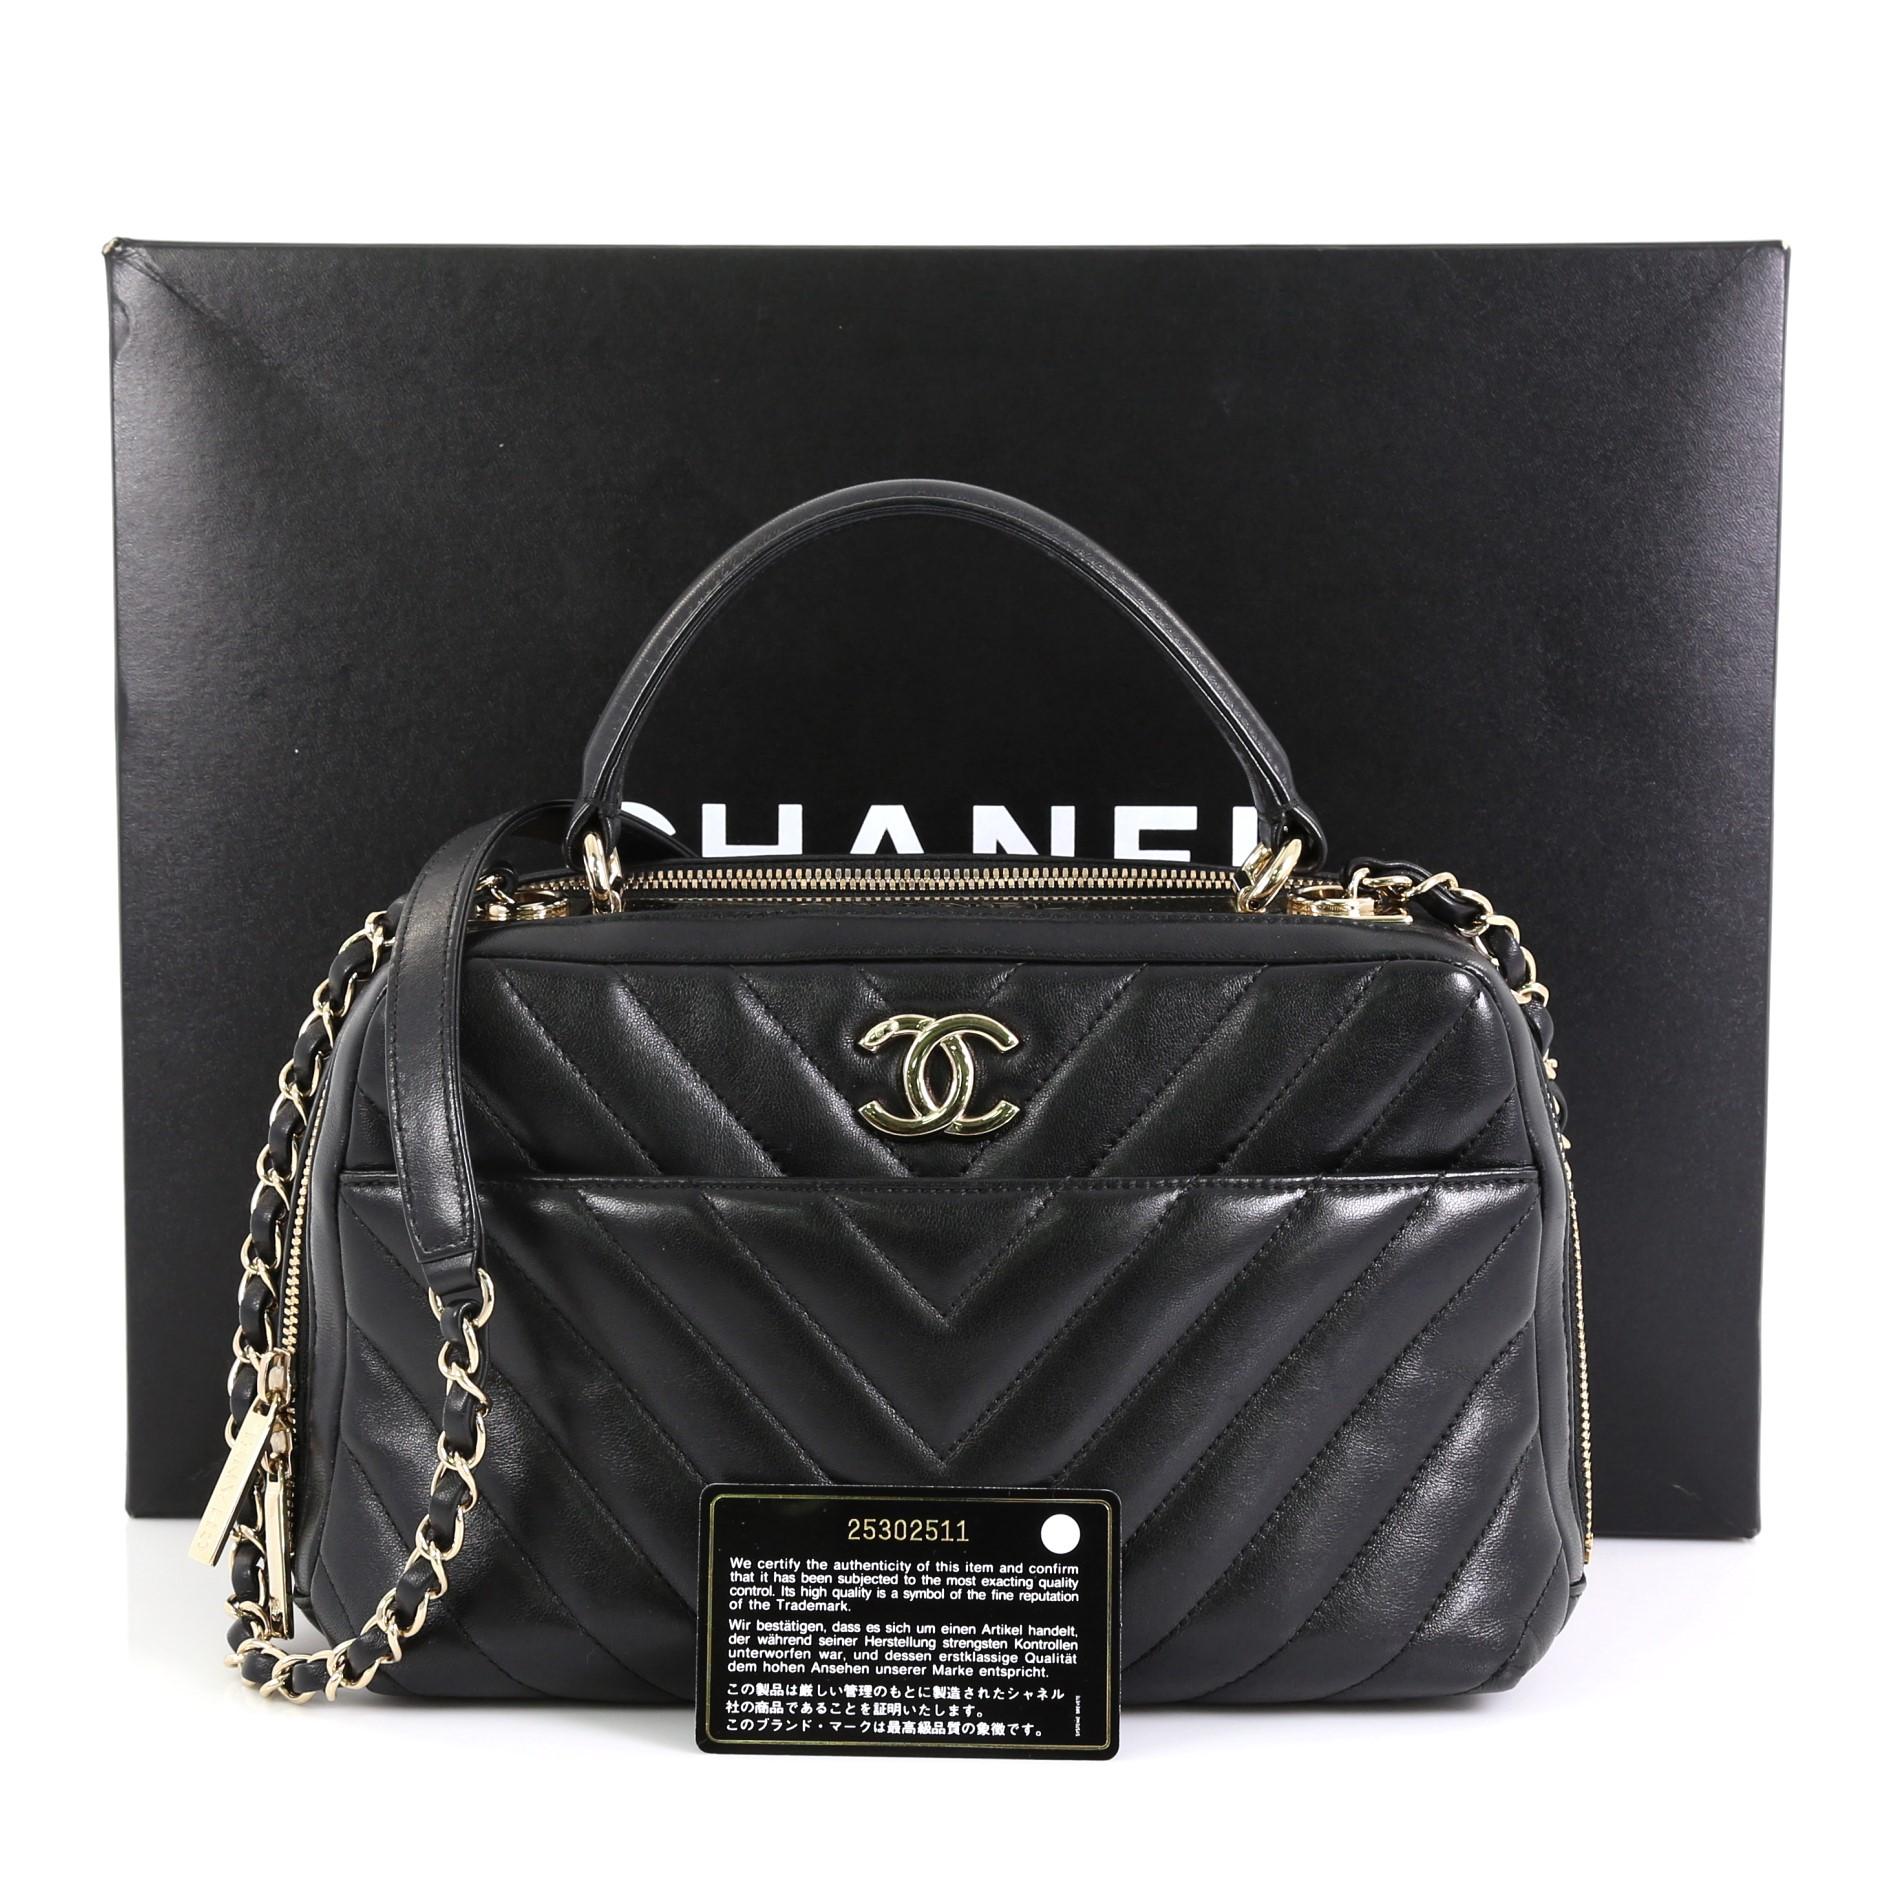 This Chanel Trendy CC Bowling Bag Chevron Lambskin Medium, crafted from black chevron lambskin leather, features a leather top handle, woven-in leather chain strap with leather pad, metal plate on top with Chanel logo, and gold-tone hardware. Its